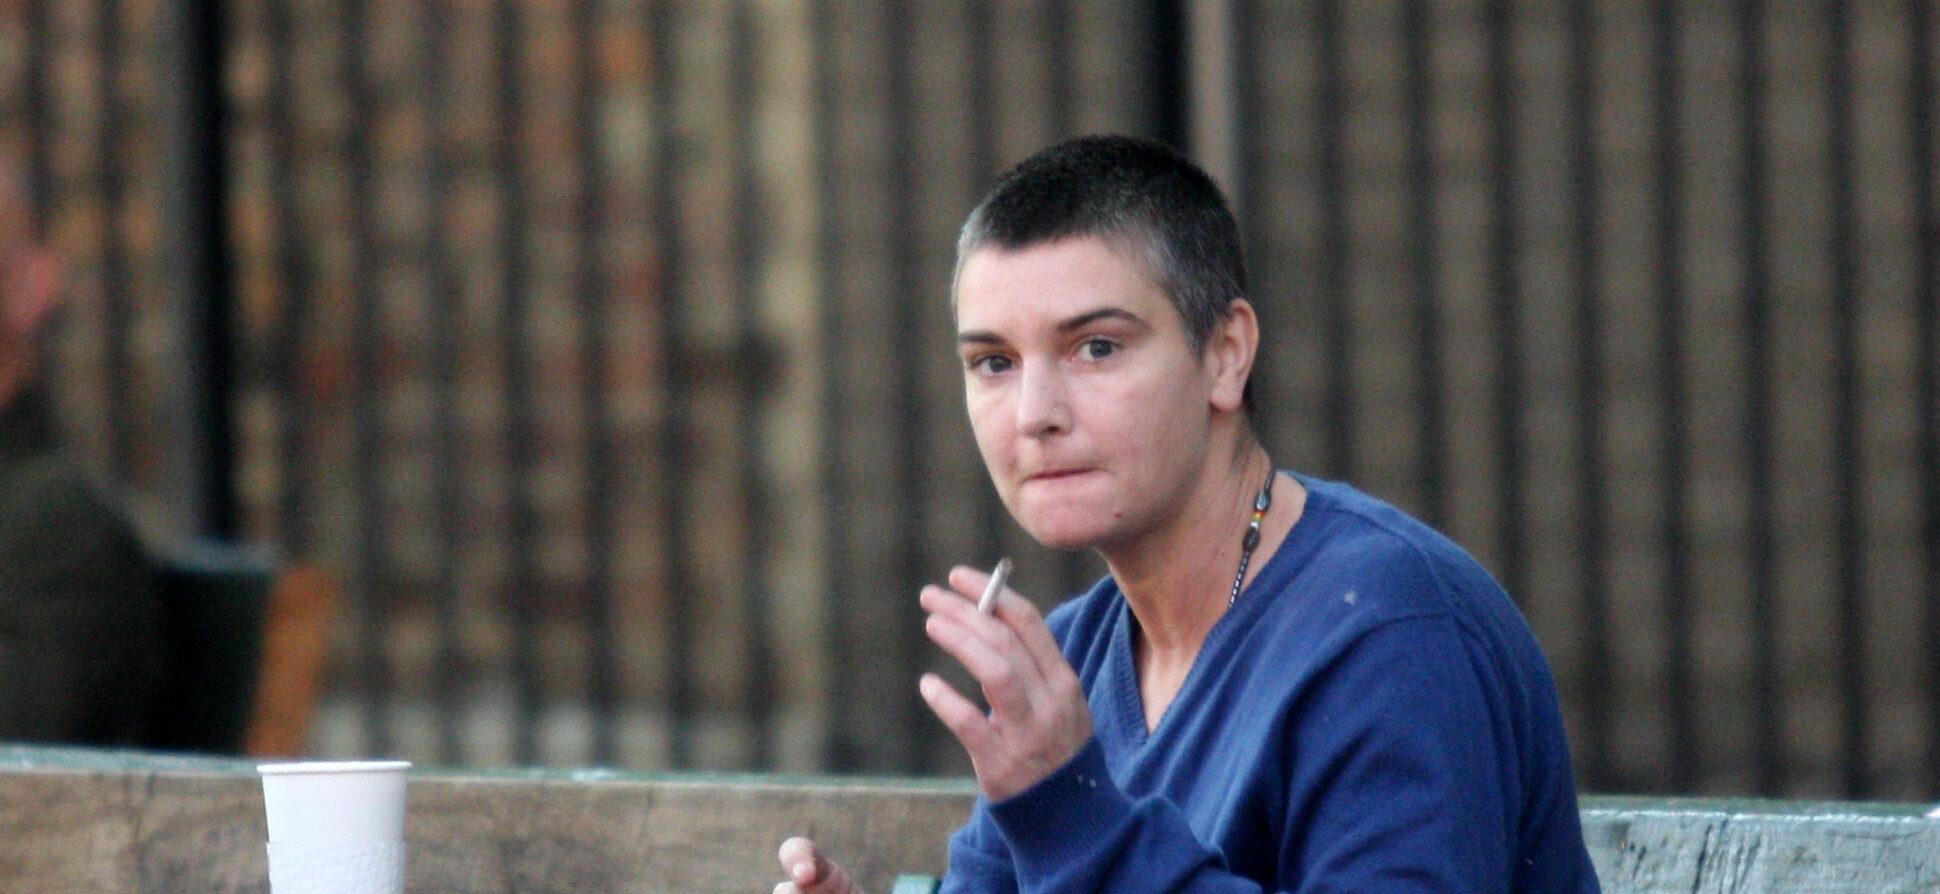 Fans And Celebrities Pay Tribute To Sinéad O’Connor Following Singer’s Passing